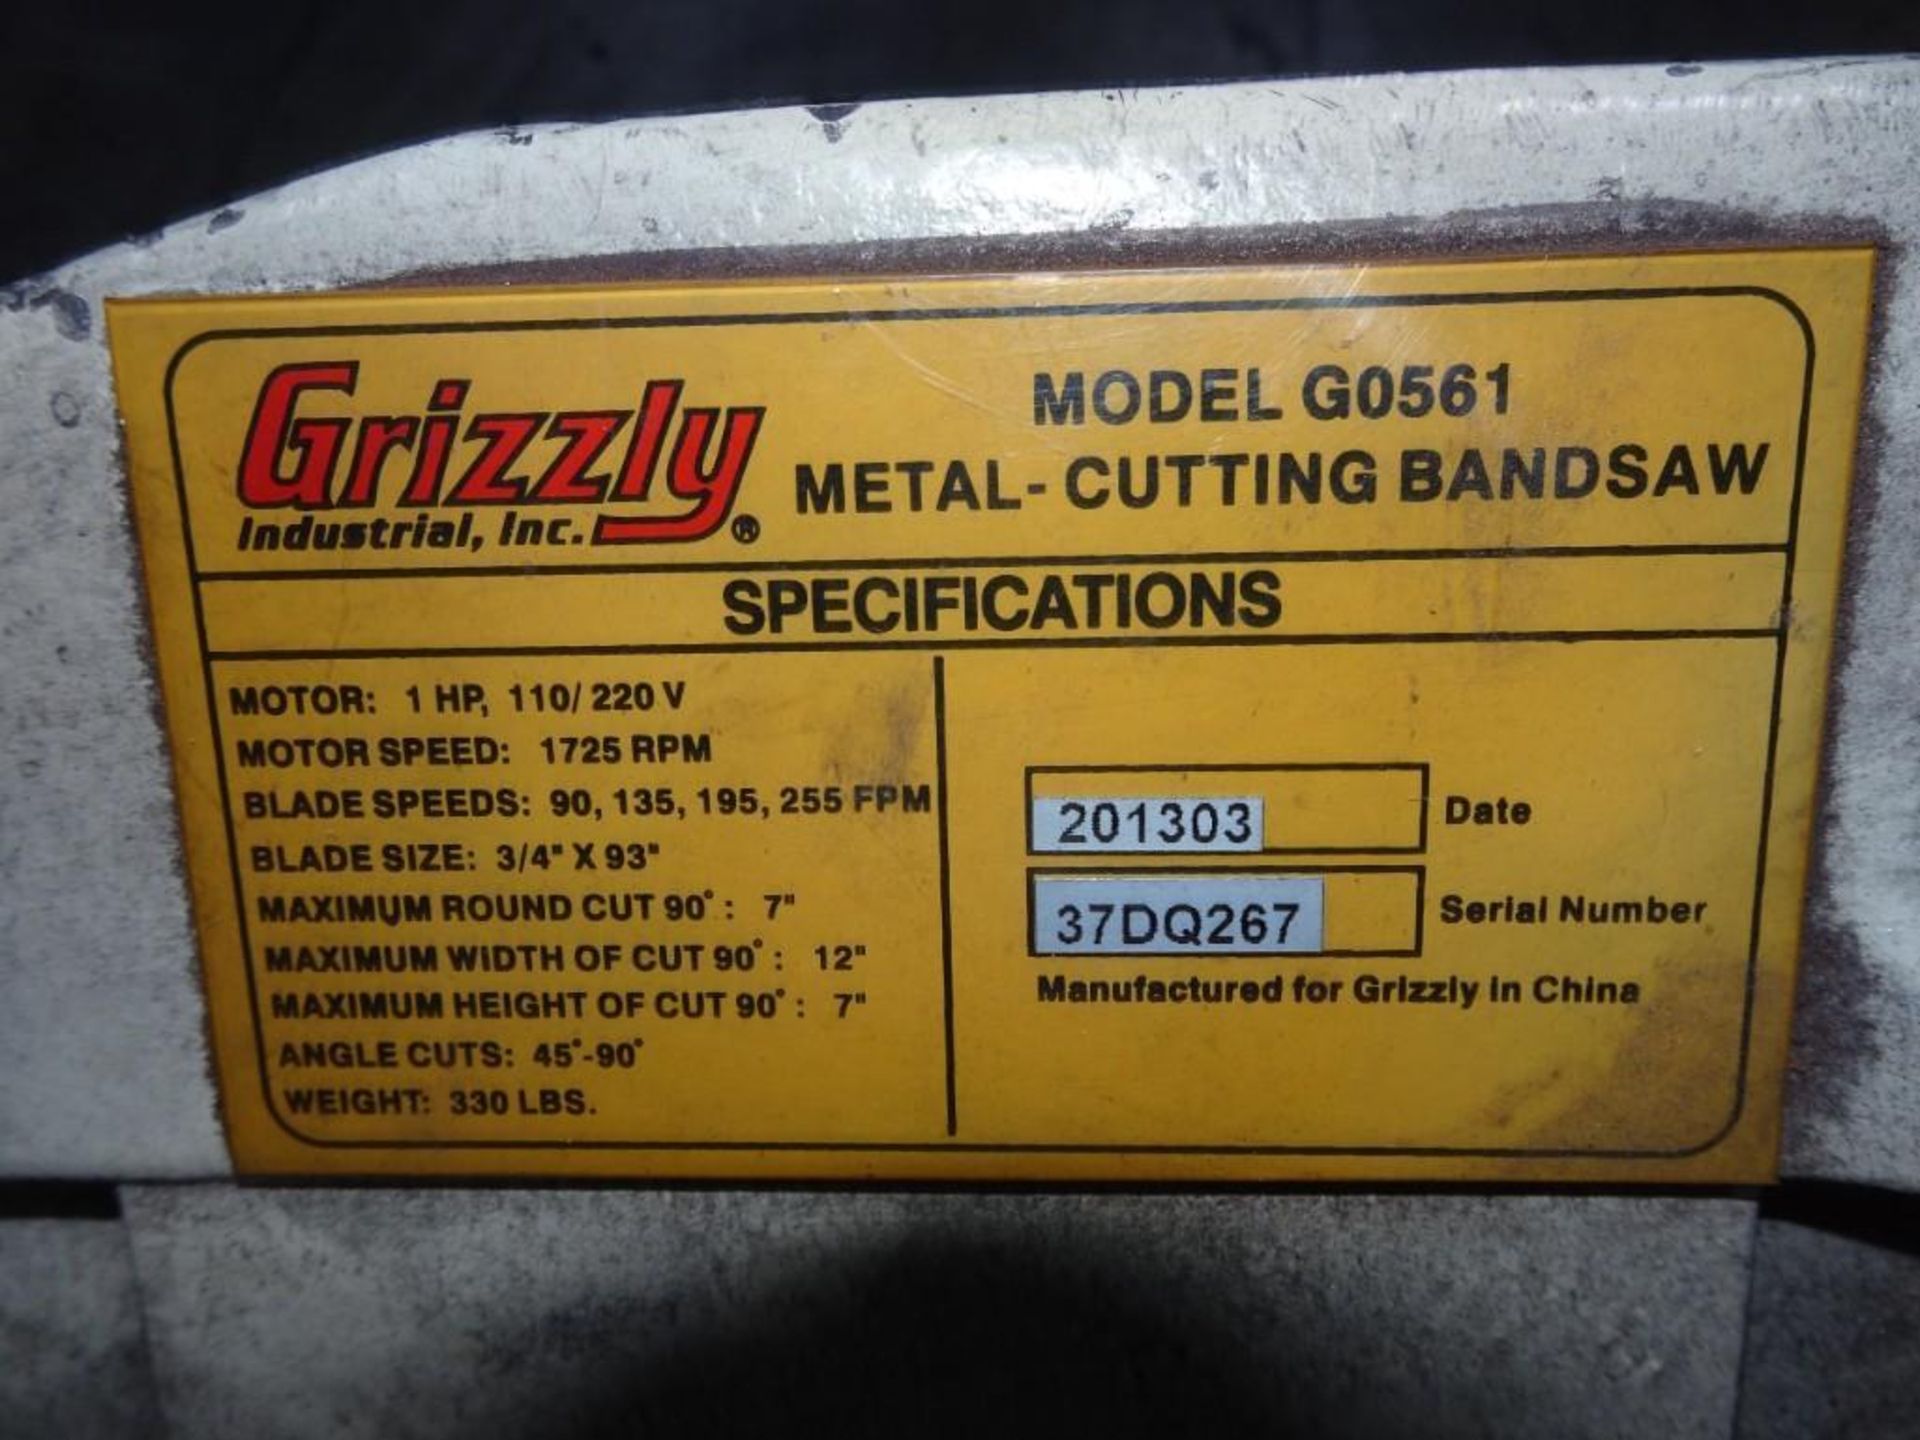 Grizzly G0561 1 HP Metal-Cutting Bandsaw, s/n 37DQ267 - Image 2 of 2